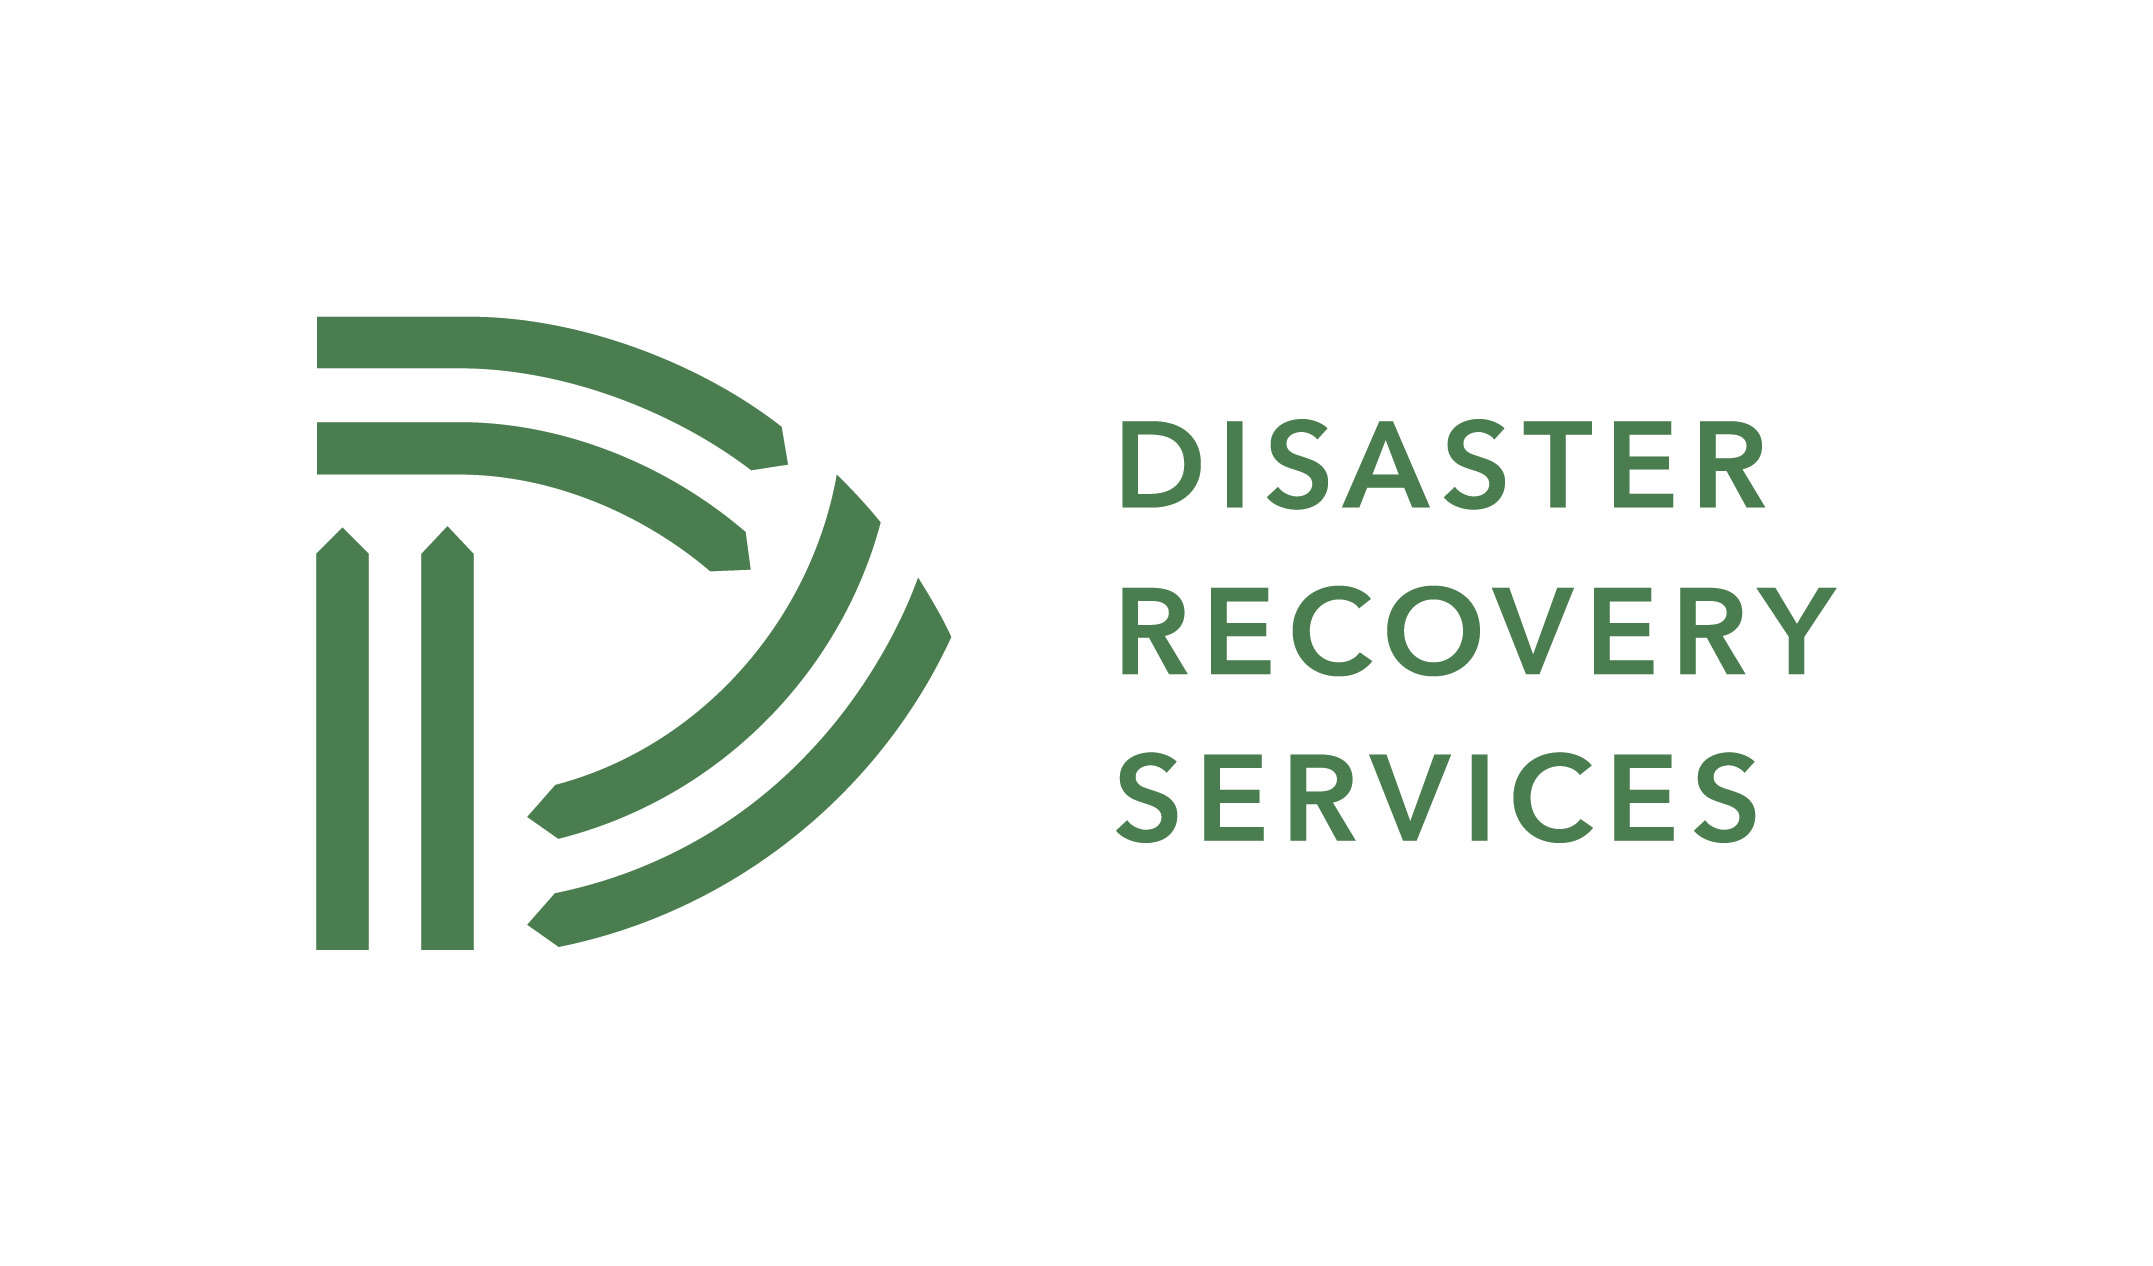 Disaster Recovery Services logo